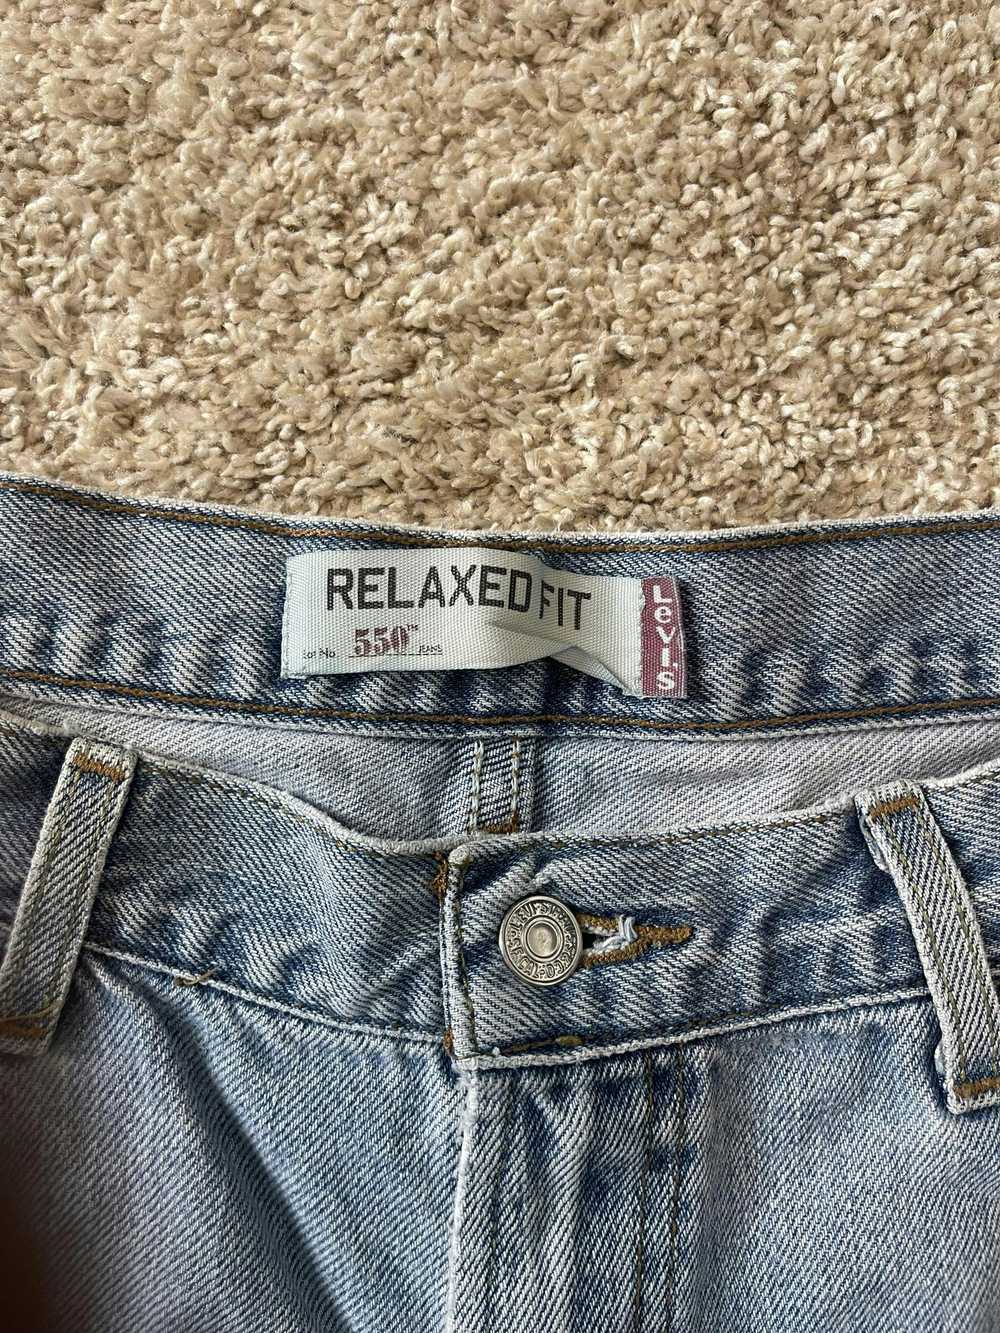 Designer Levis Levi Strauss & Co Relax Fit Cut of… - image 2